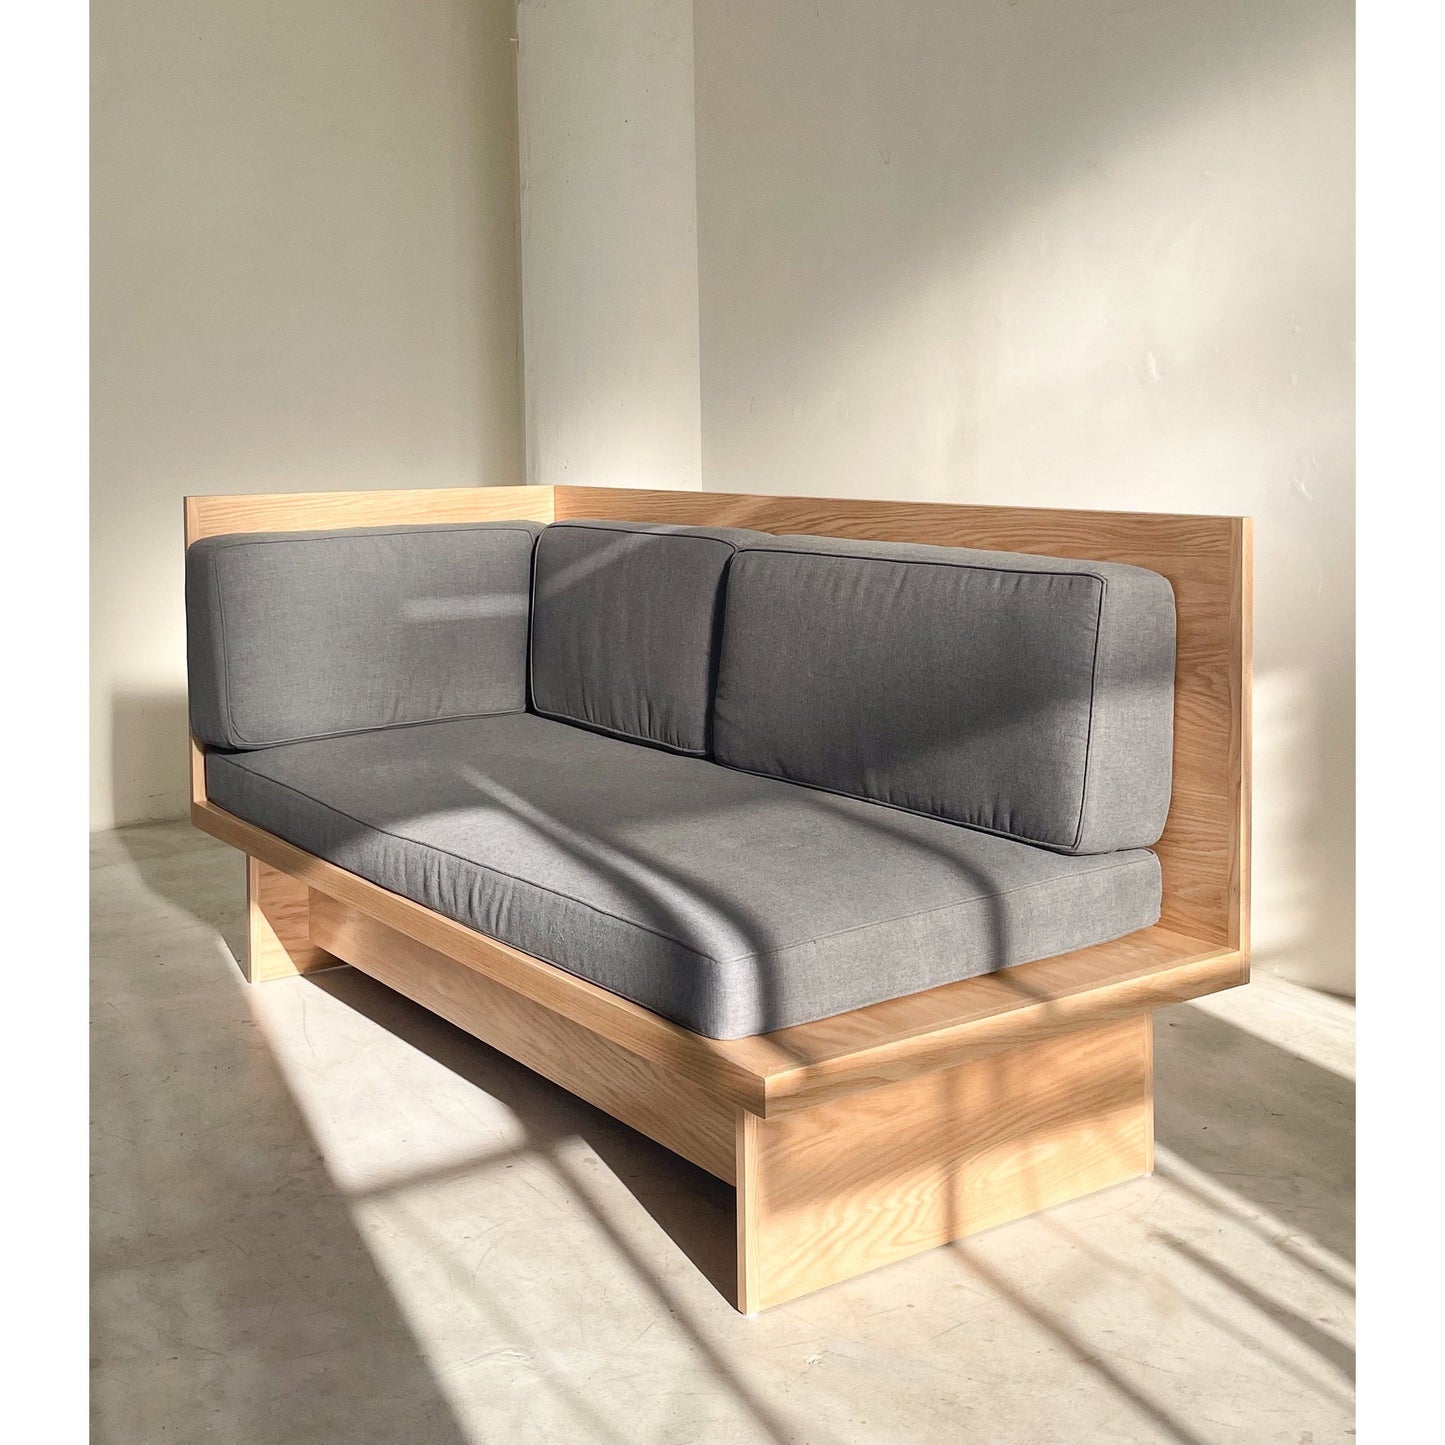 L-Shaped Couch | Twin Bed | Solid Oak | Modern Minimalist Wood Daybed LA | Handcrafted wooden daybed